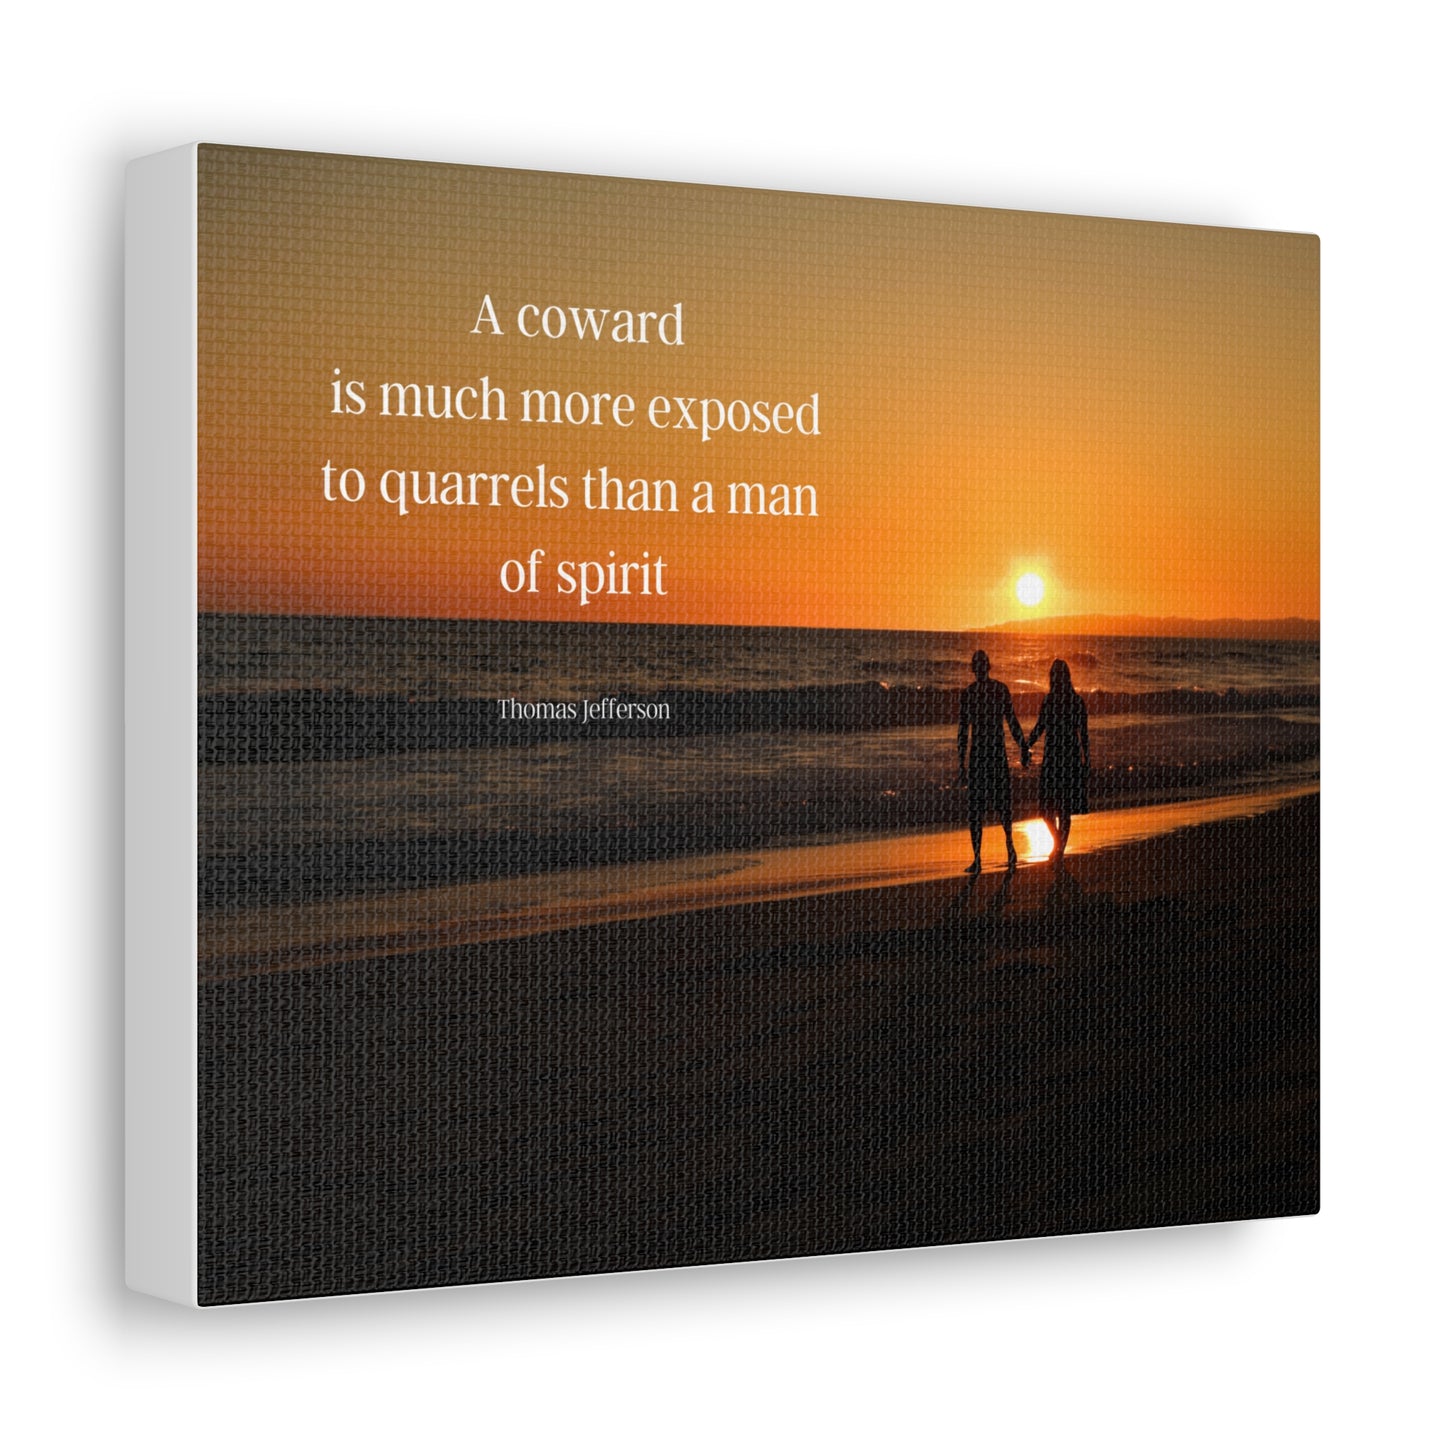 Thomas Jefferson Quote 6, Canvas Art, Horizontal Beach Print in Color, 3rd President of the United States, Ocean Art, Sunset, Nature, Political Art, Canvas Prints, Presidential Quotes, Inspirational Quotes